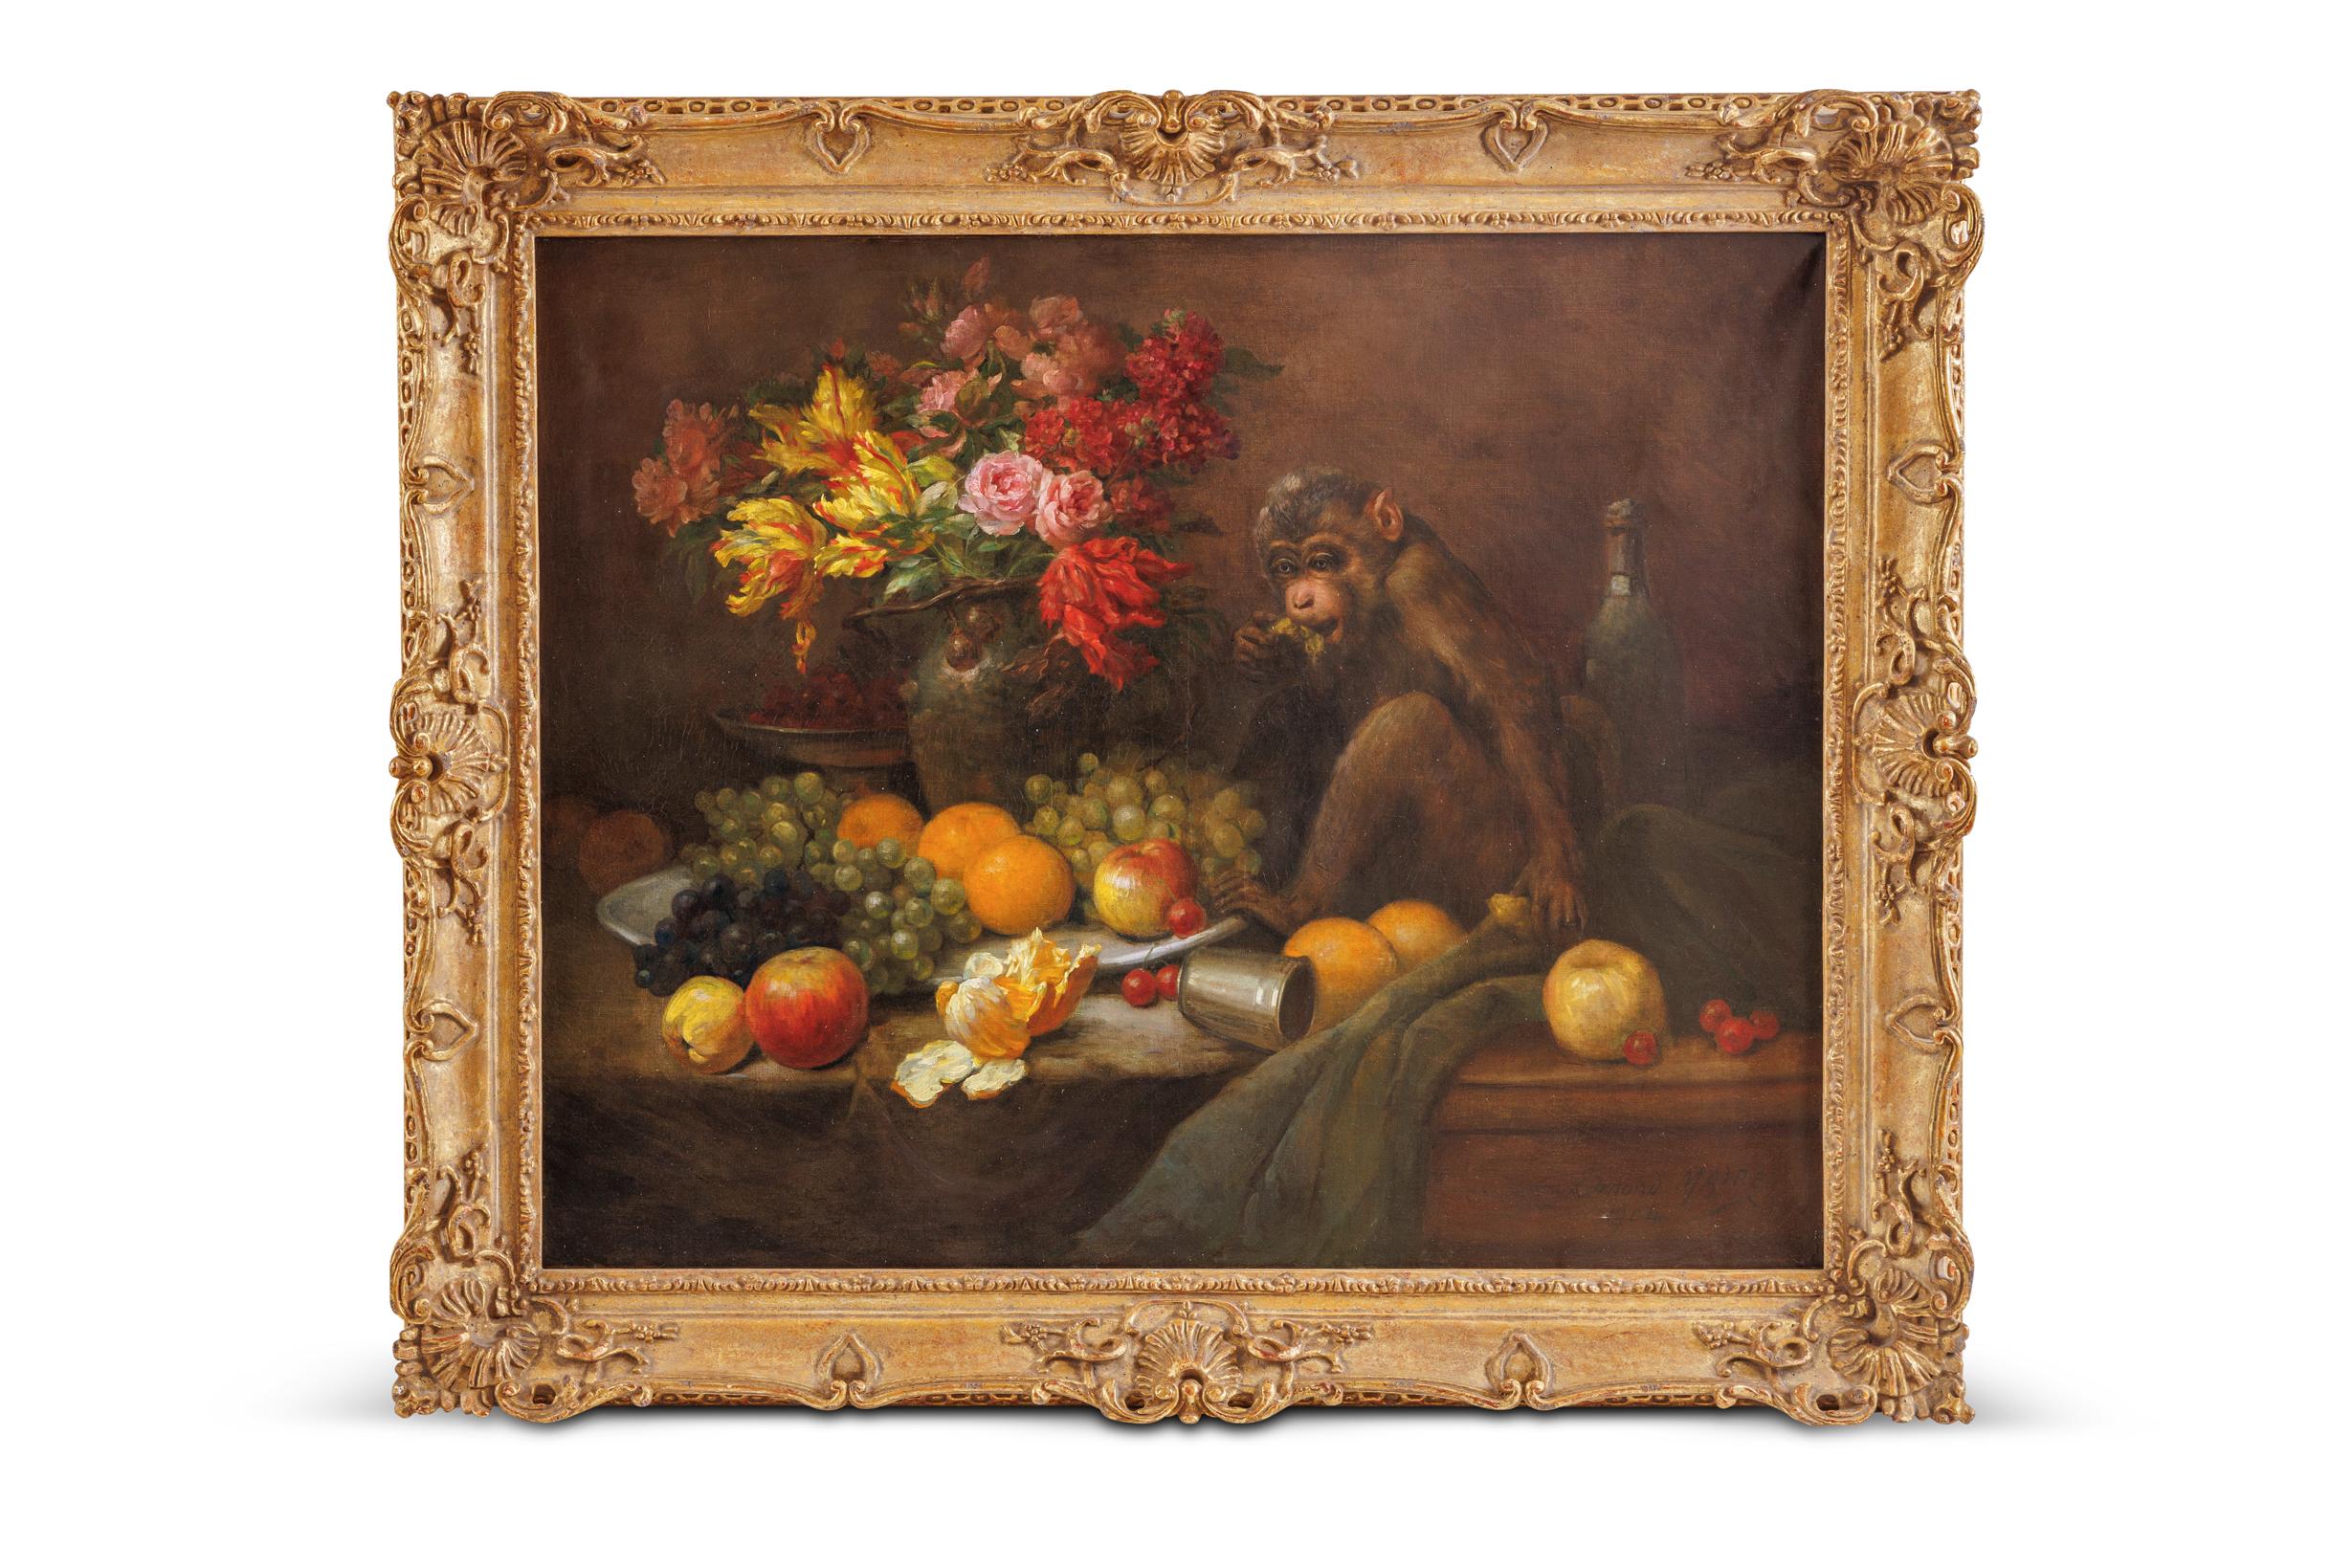 Edmond Louis Maire (French, 1862-1914) A Monkey Still Life Painting with Fruits and Flowers, 1904

Oil on canvas

Signed Lower Right Edmond Maire and dated 1904.

The artists' artistic prowess shines through in this remarkable composition, where a